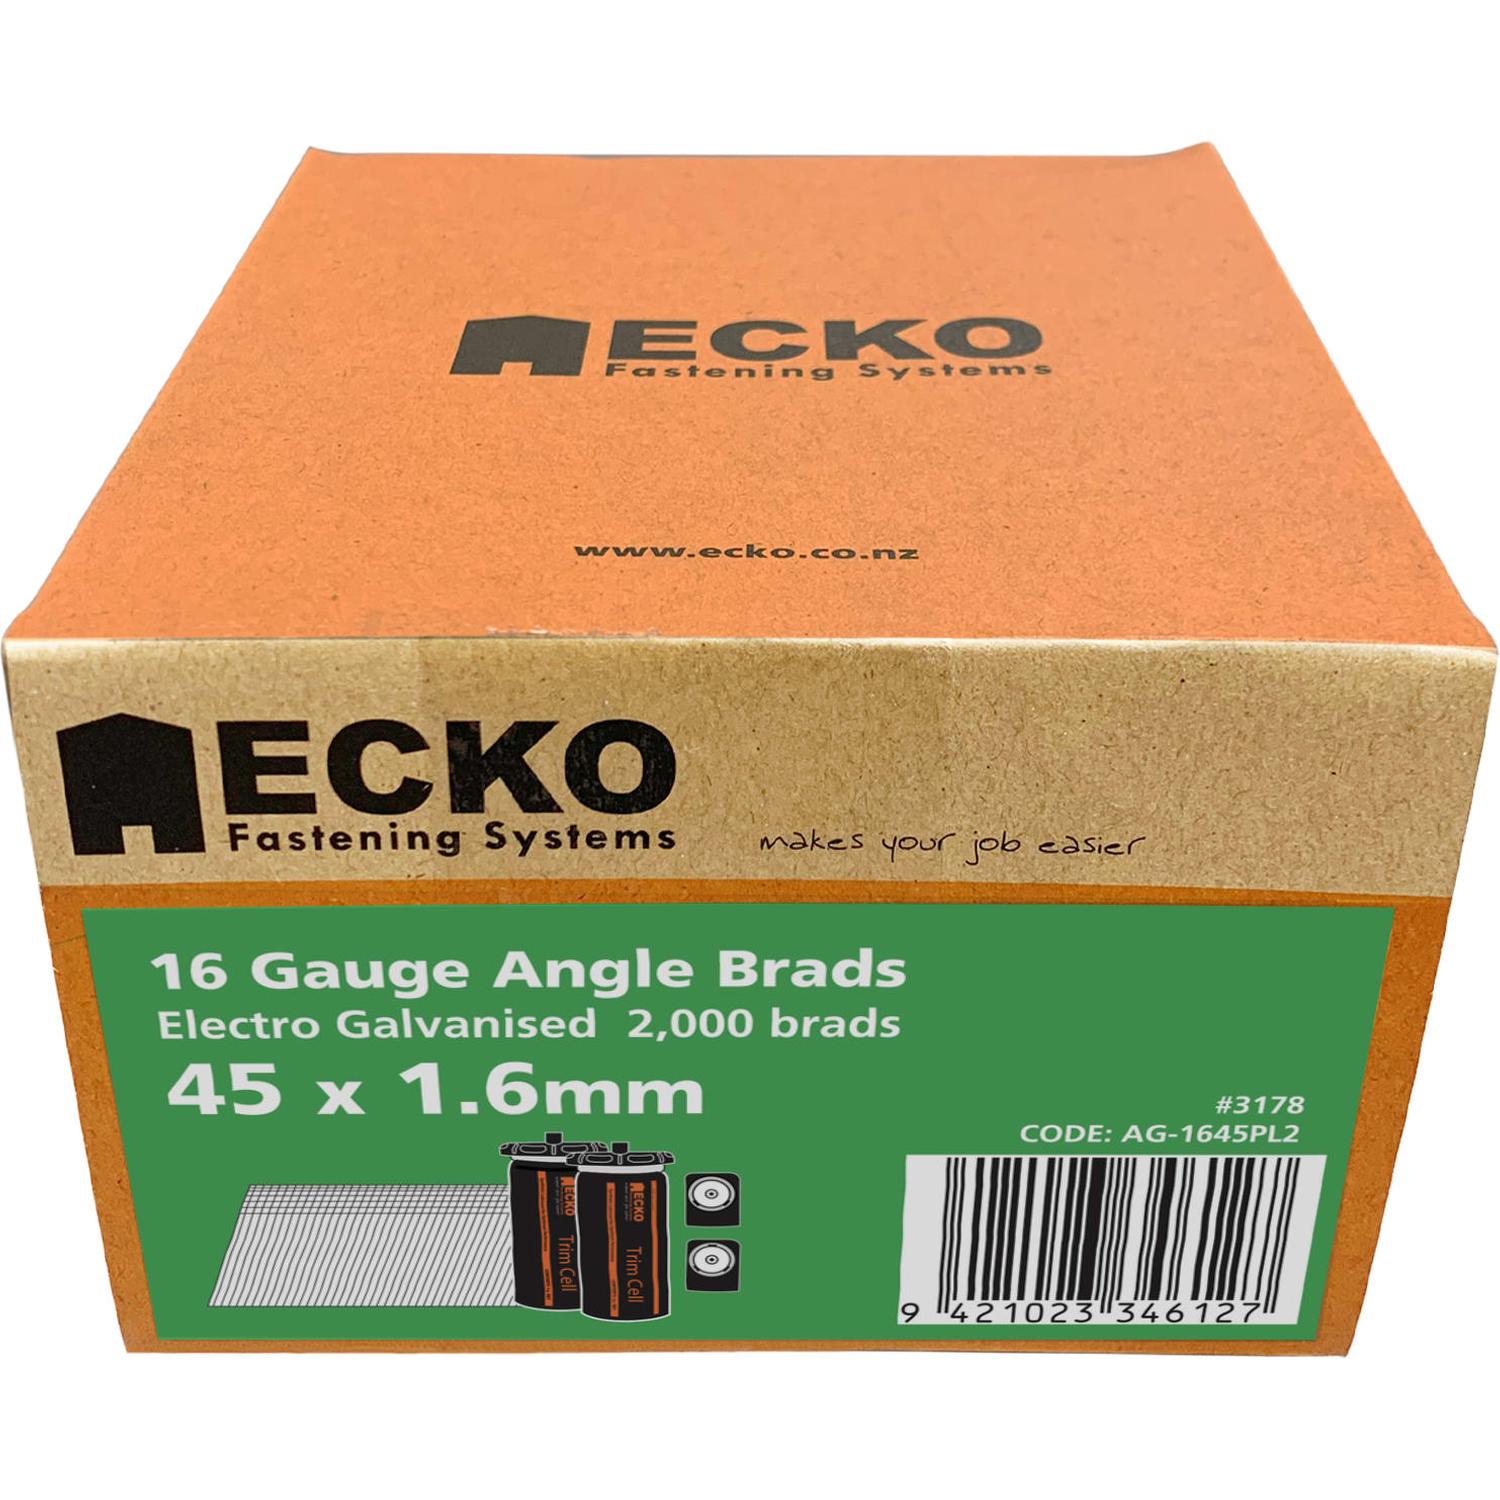 Ecko 16 Gauge Angle Brads Gas Pack 45 X 1.6Mm Electro Galvanised (2000)